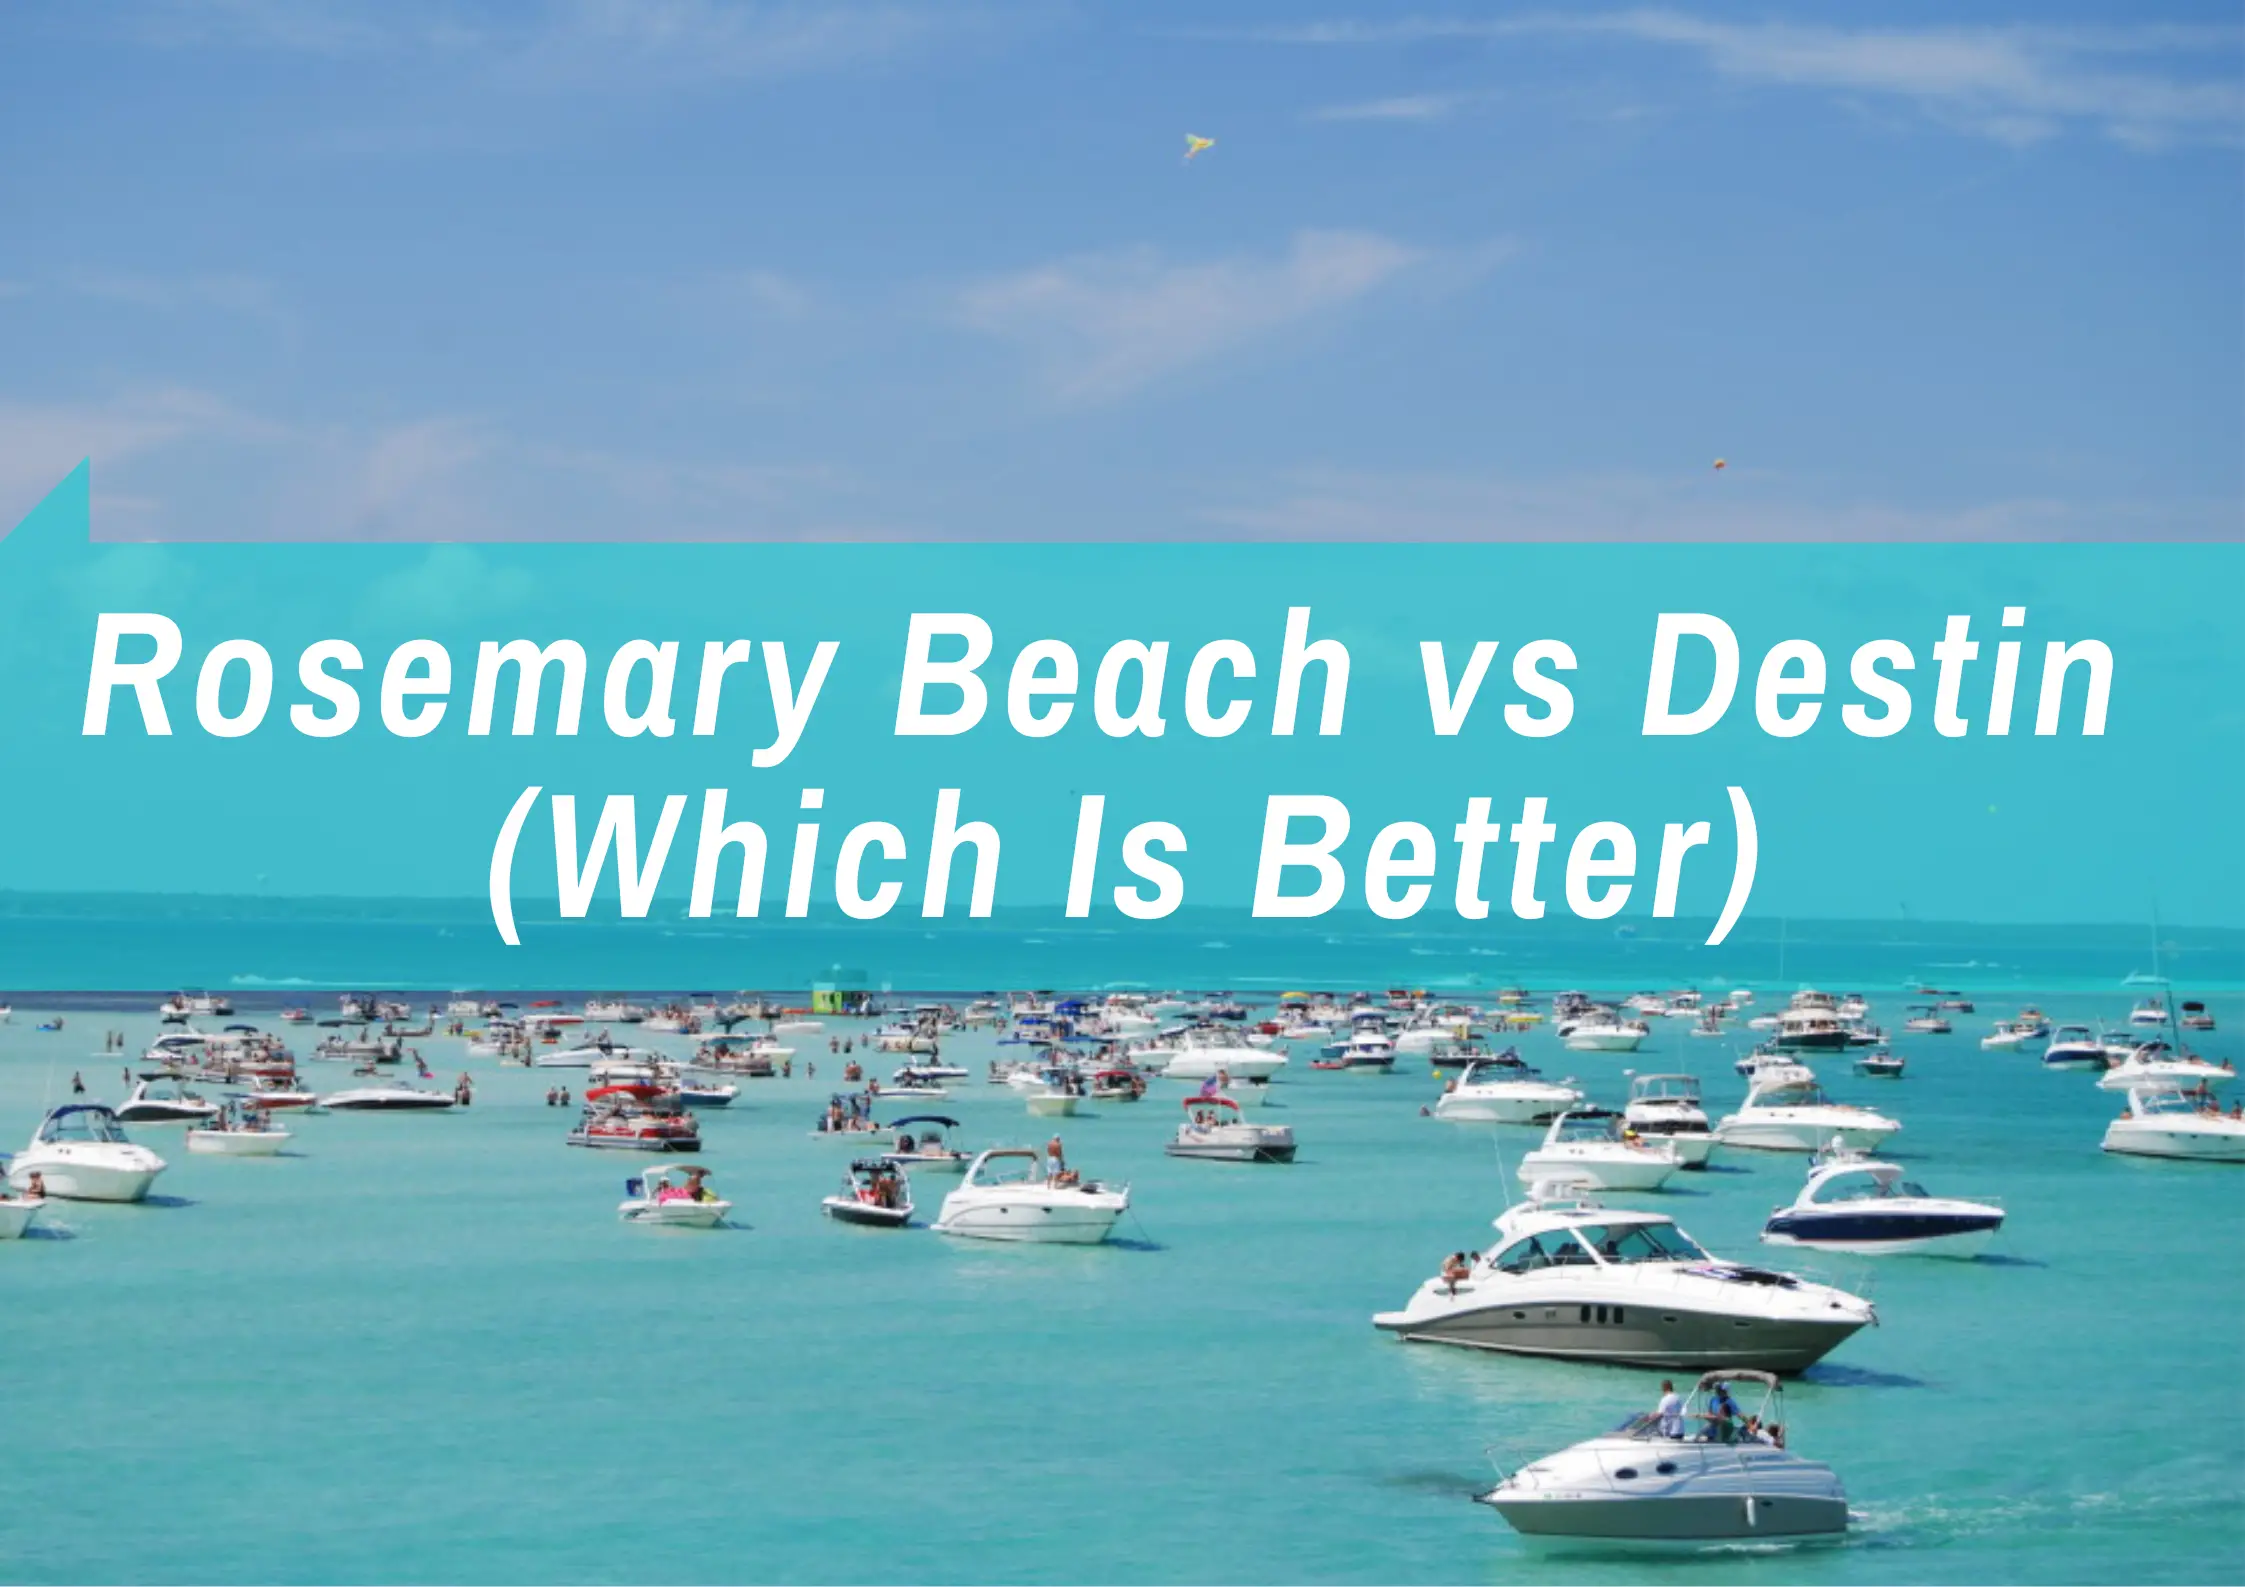 Which Is Better? Rosemary Beach or Destin?